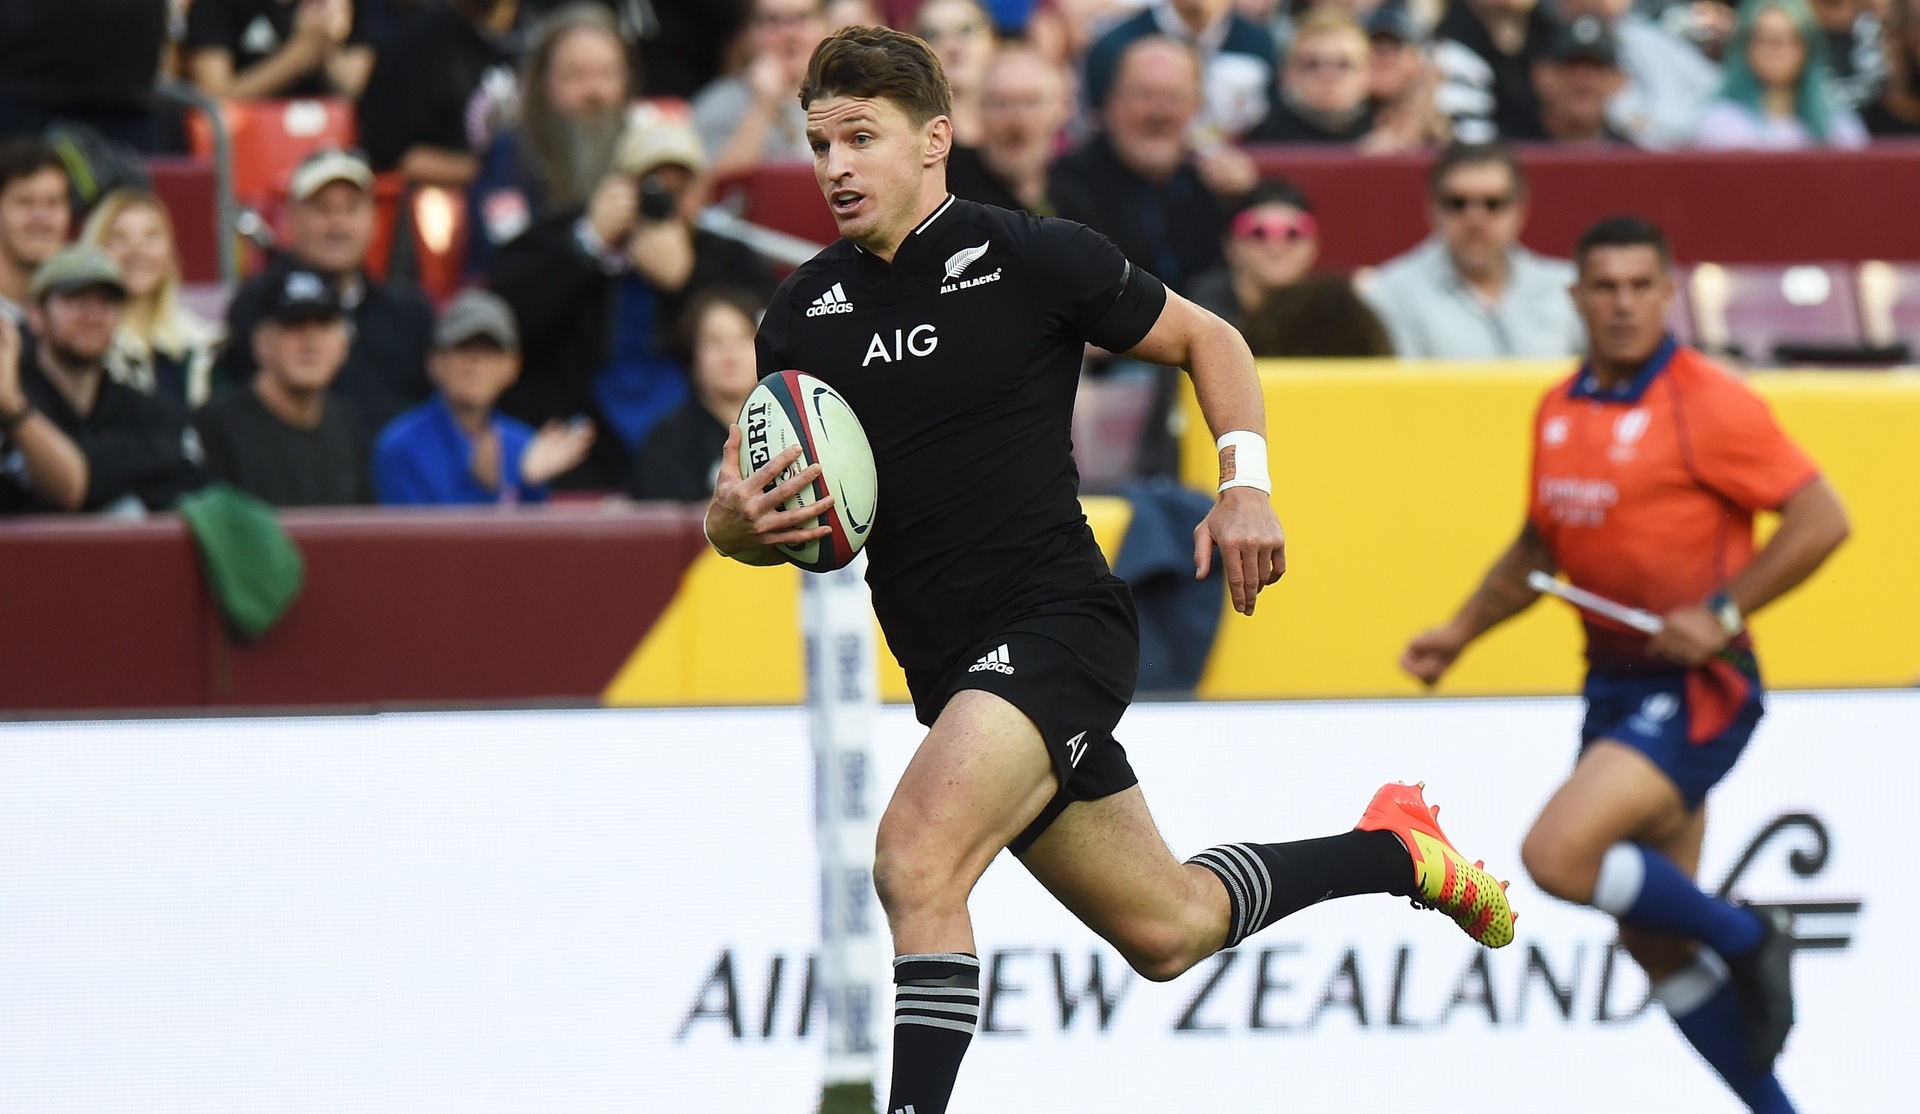 Rugby All Blacks v Wales - teams, kick-off time, live streaming and how to watch